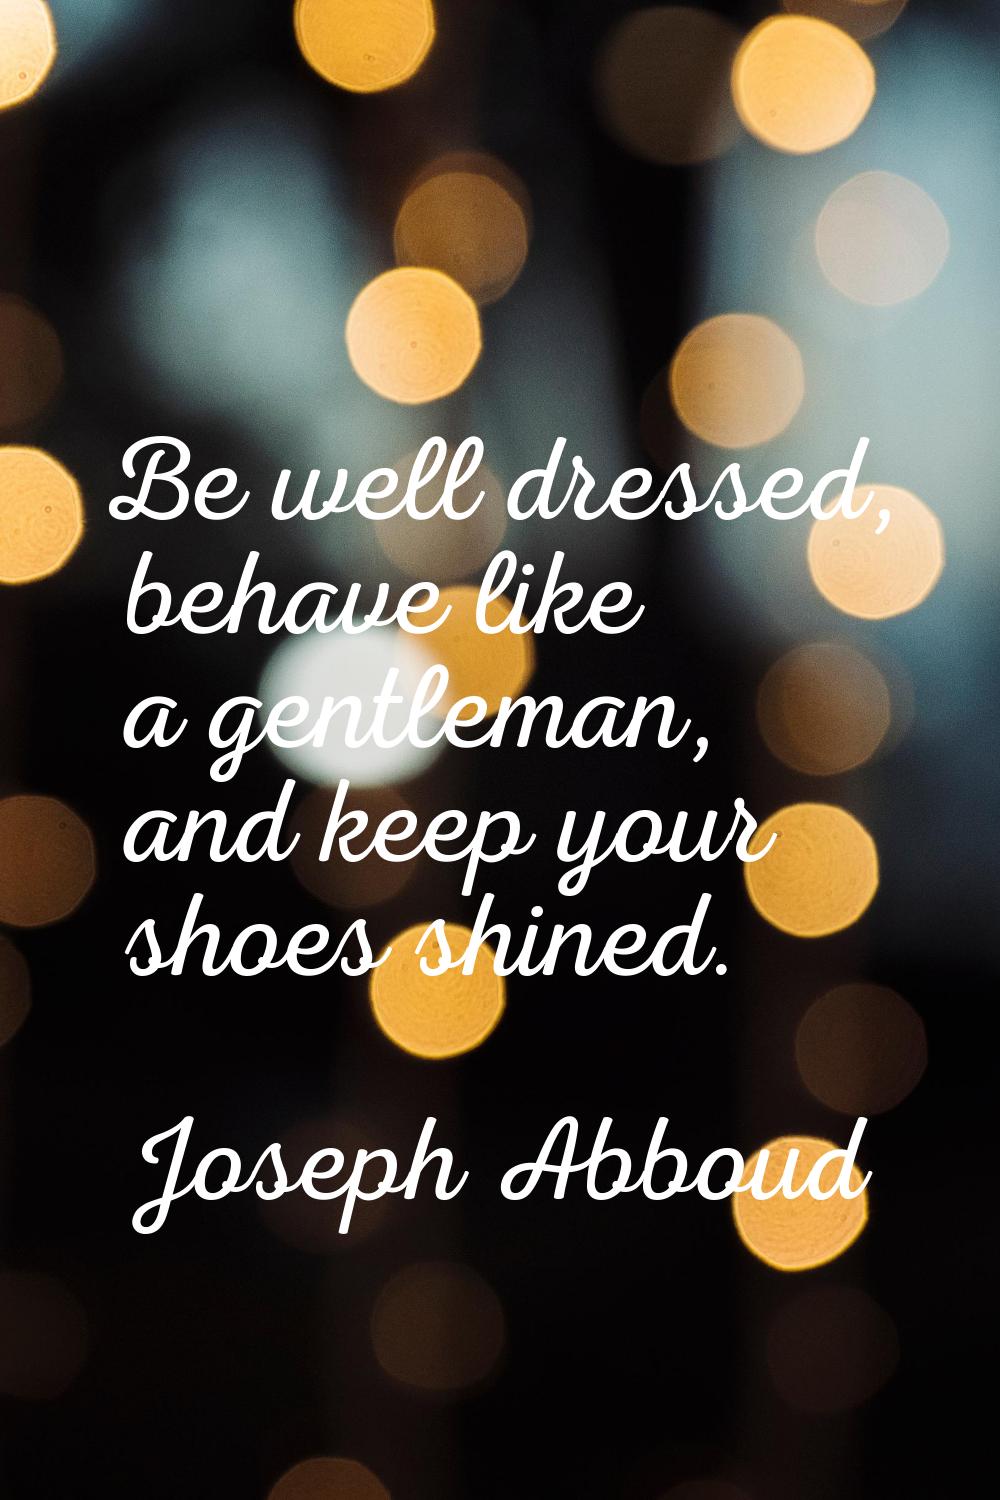 Be well dressed, behave like a gentleman, and keep your shoes shined.